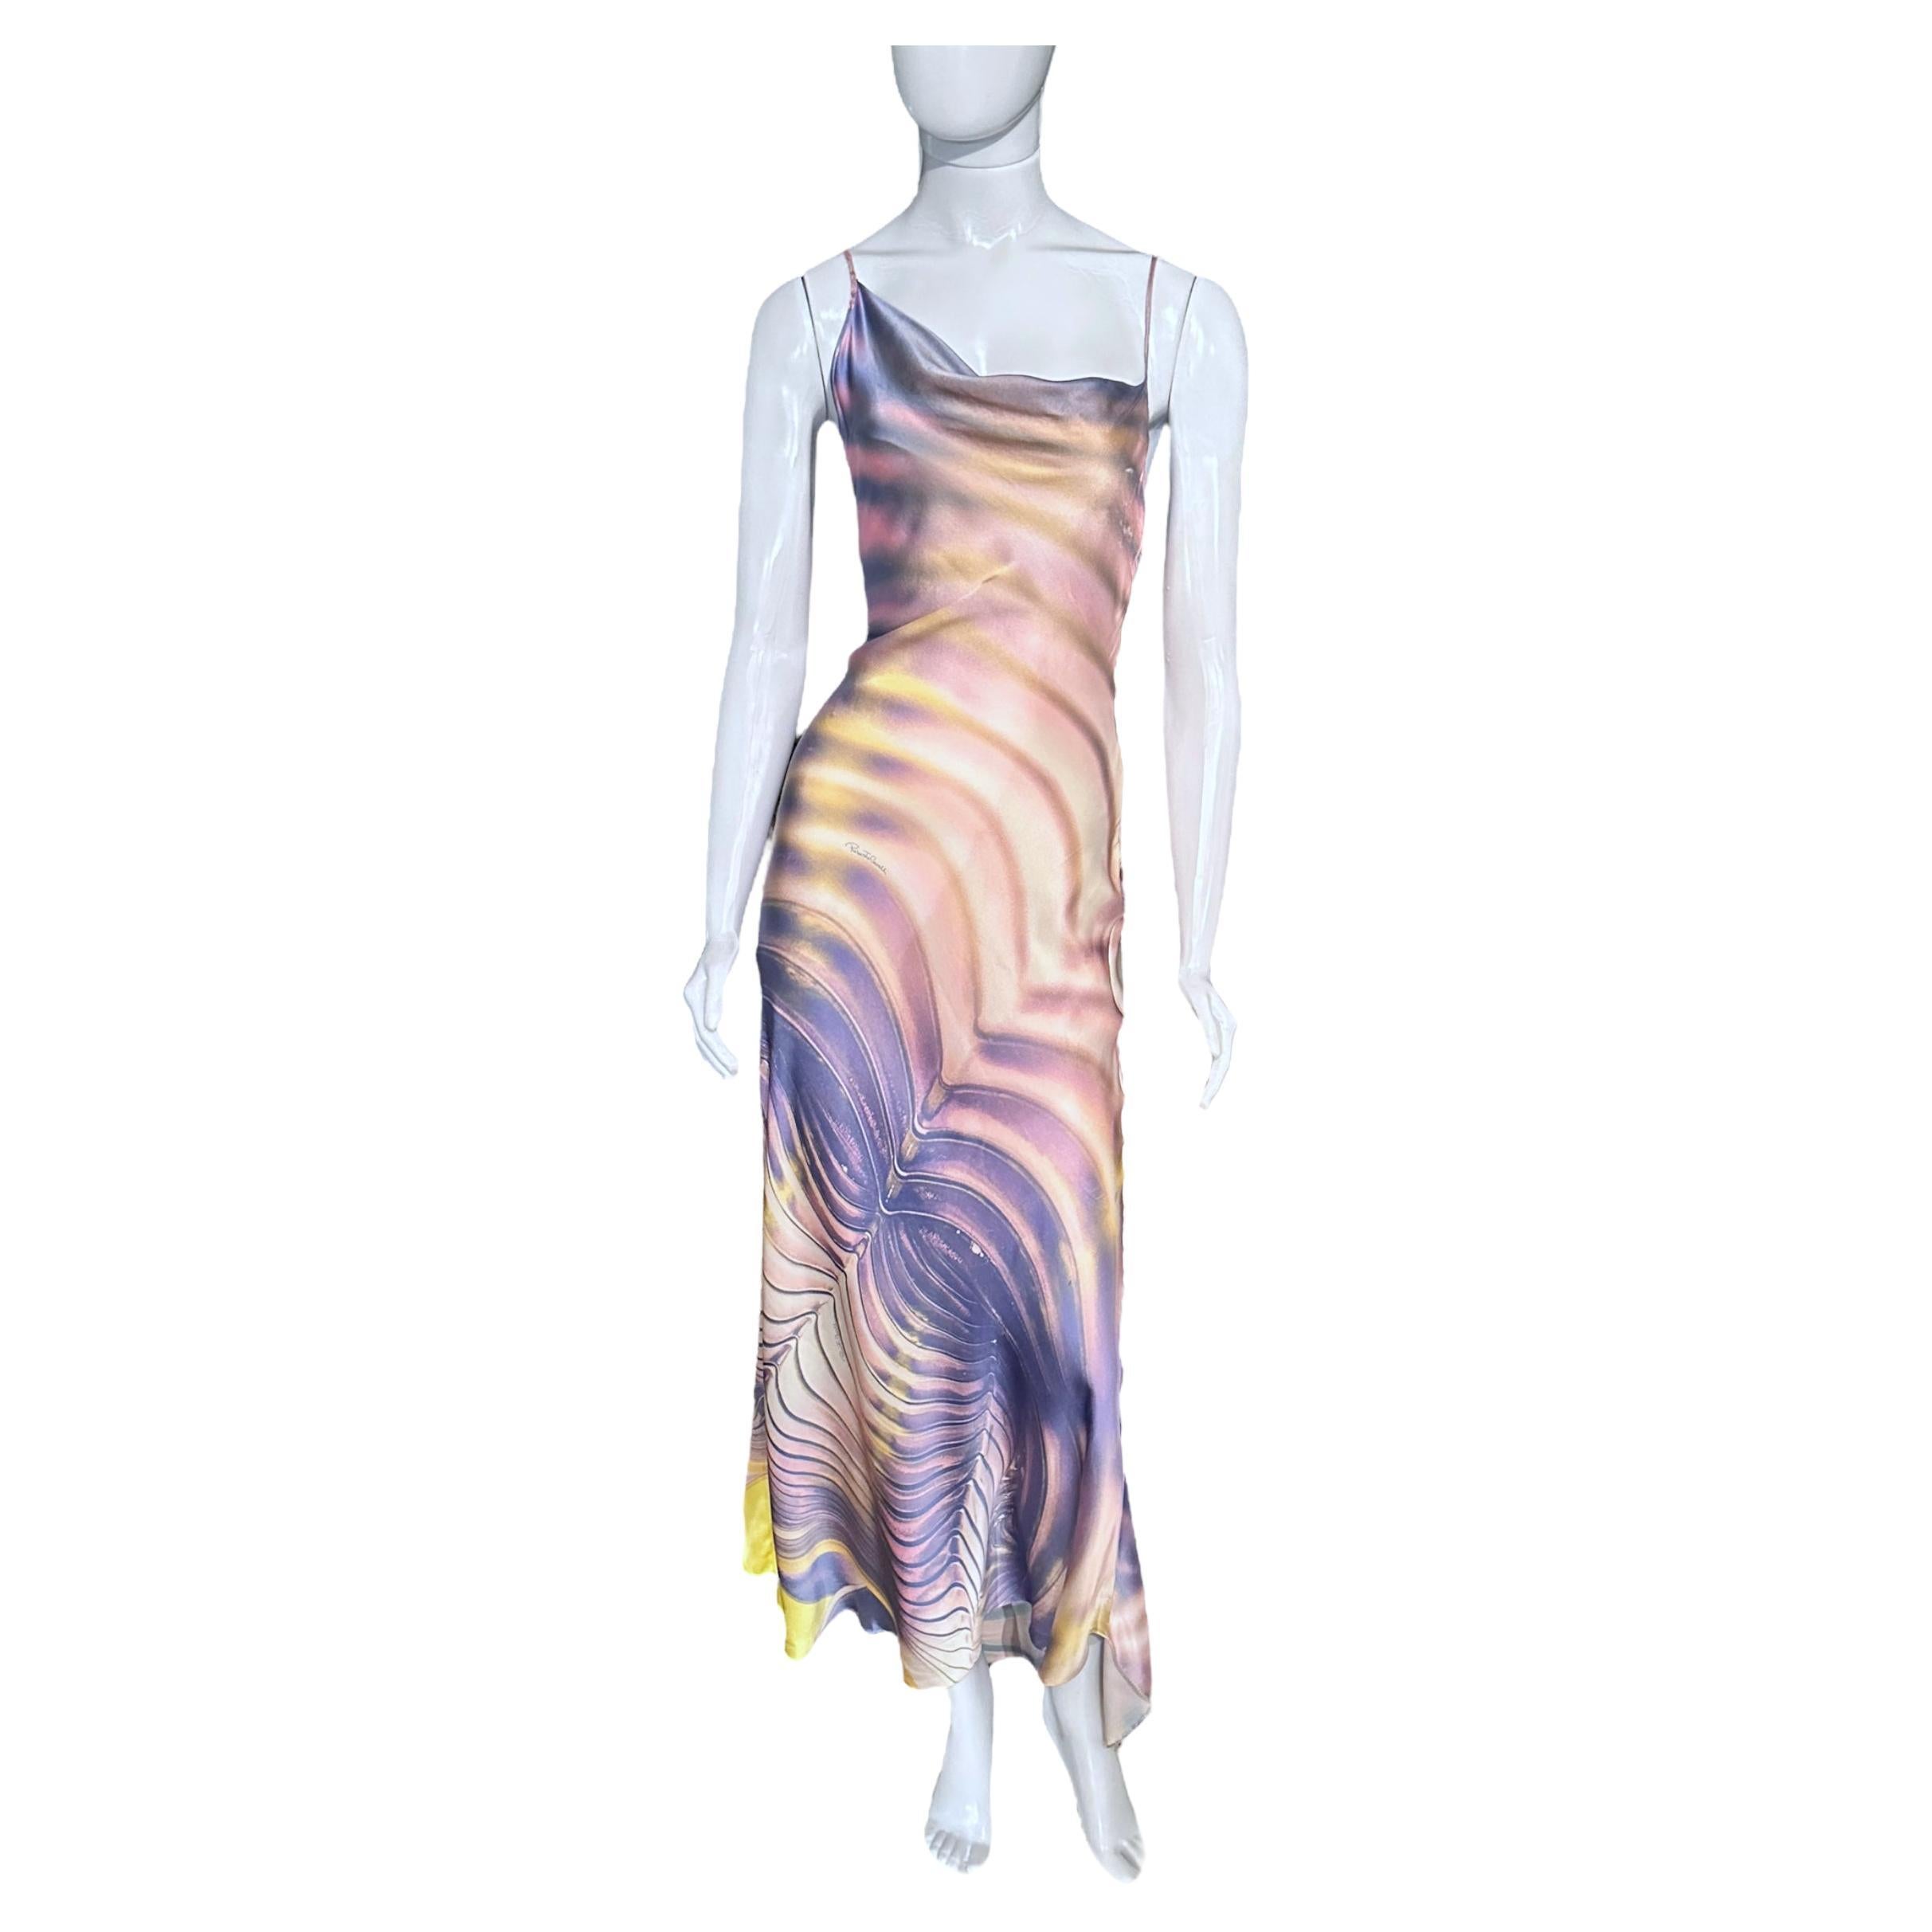 Roberto Cavalli Iconic Ss 2001 Psychedelic Print Cowl Neck Bias-Cut Silk Dress For Sale